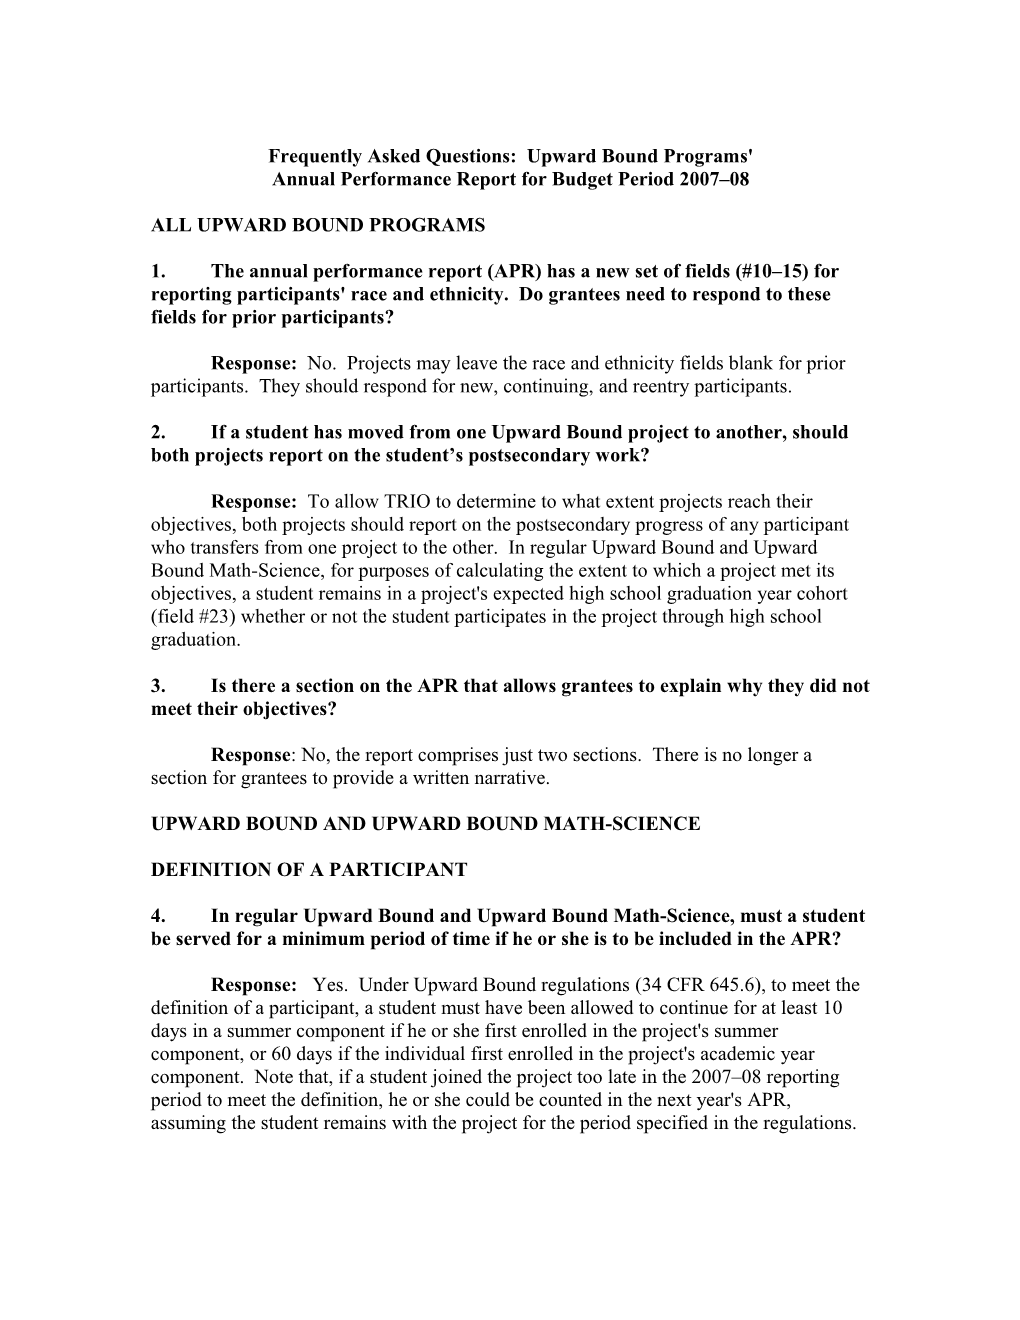 FY 2008 FAQ for the Upward Bound Program Annual Performance Report (MS Word)